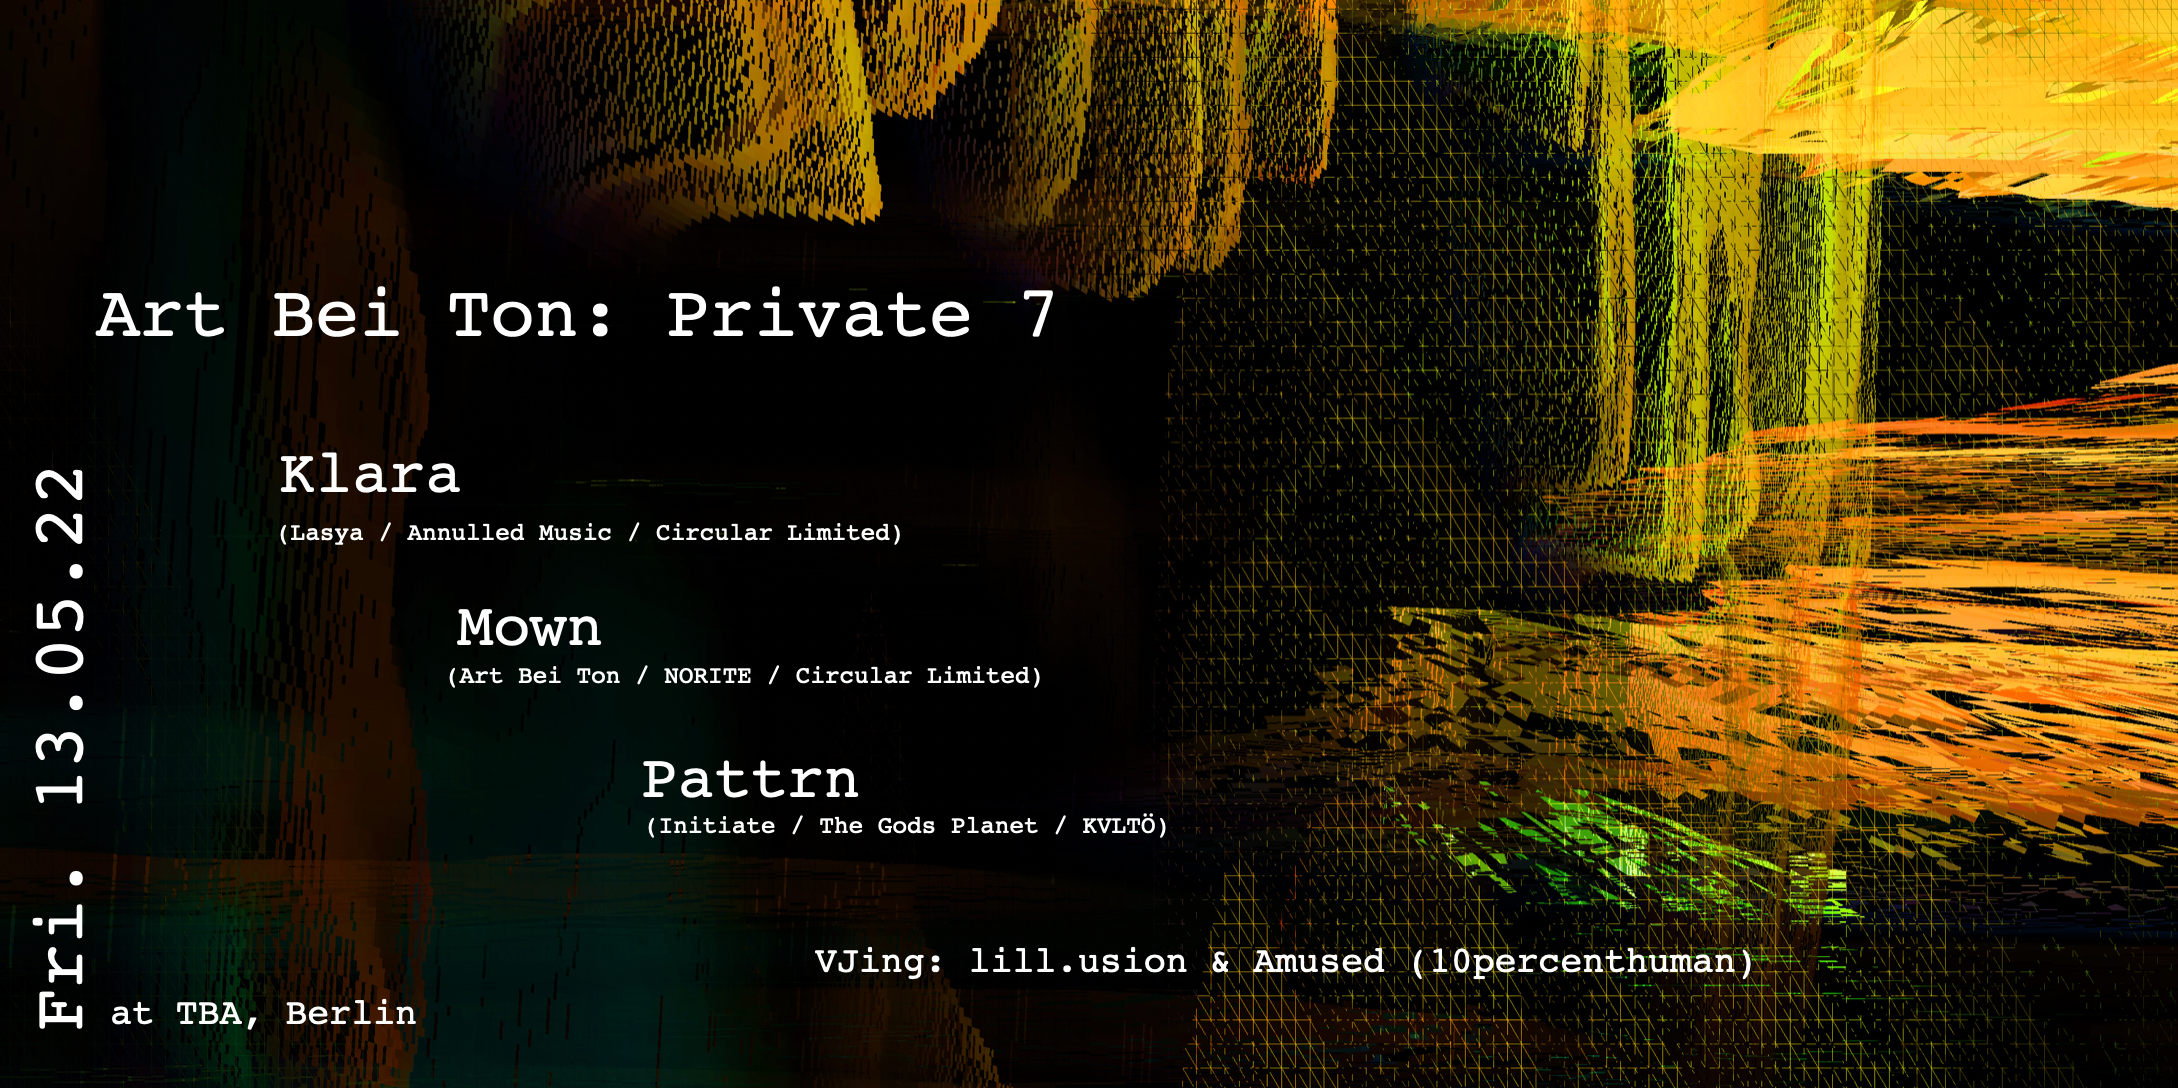 Art Bei Ton: Private 7 - フライヤー表